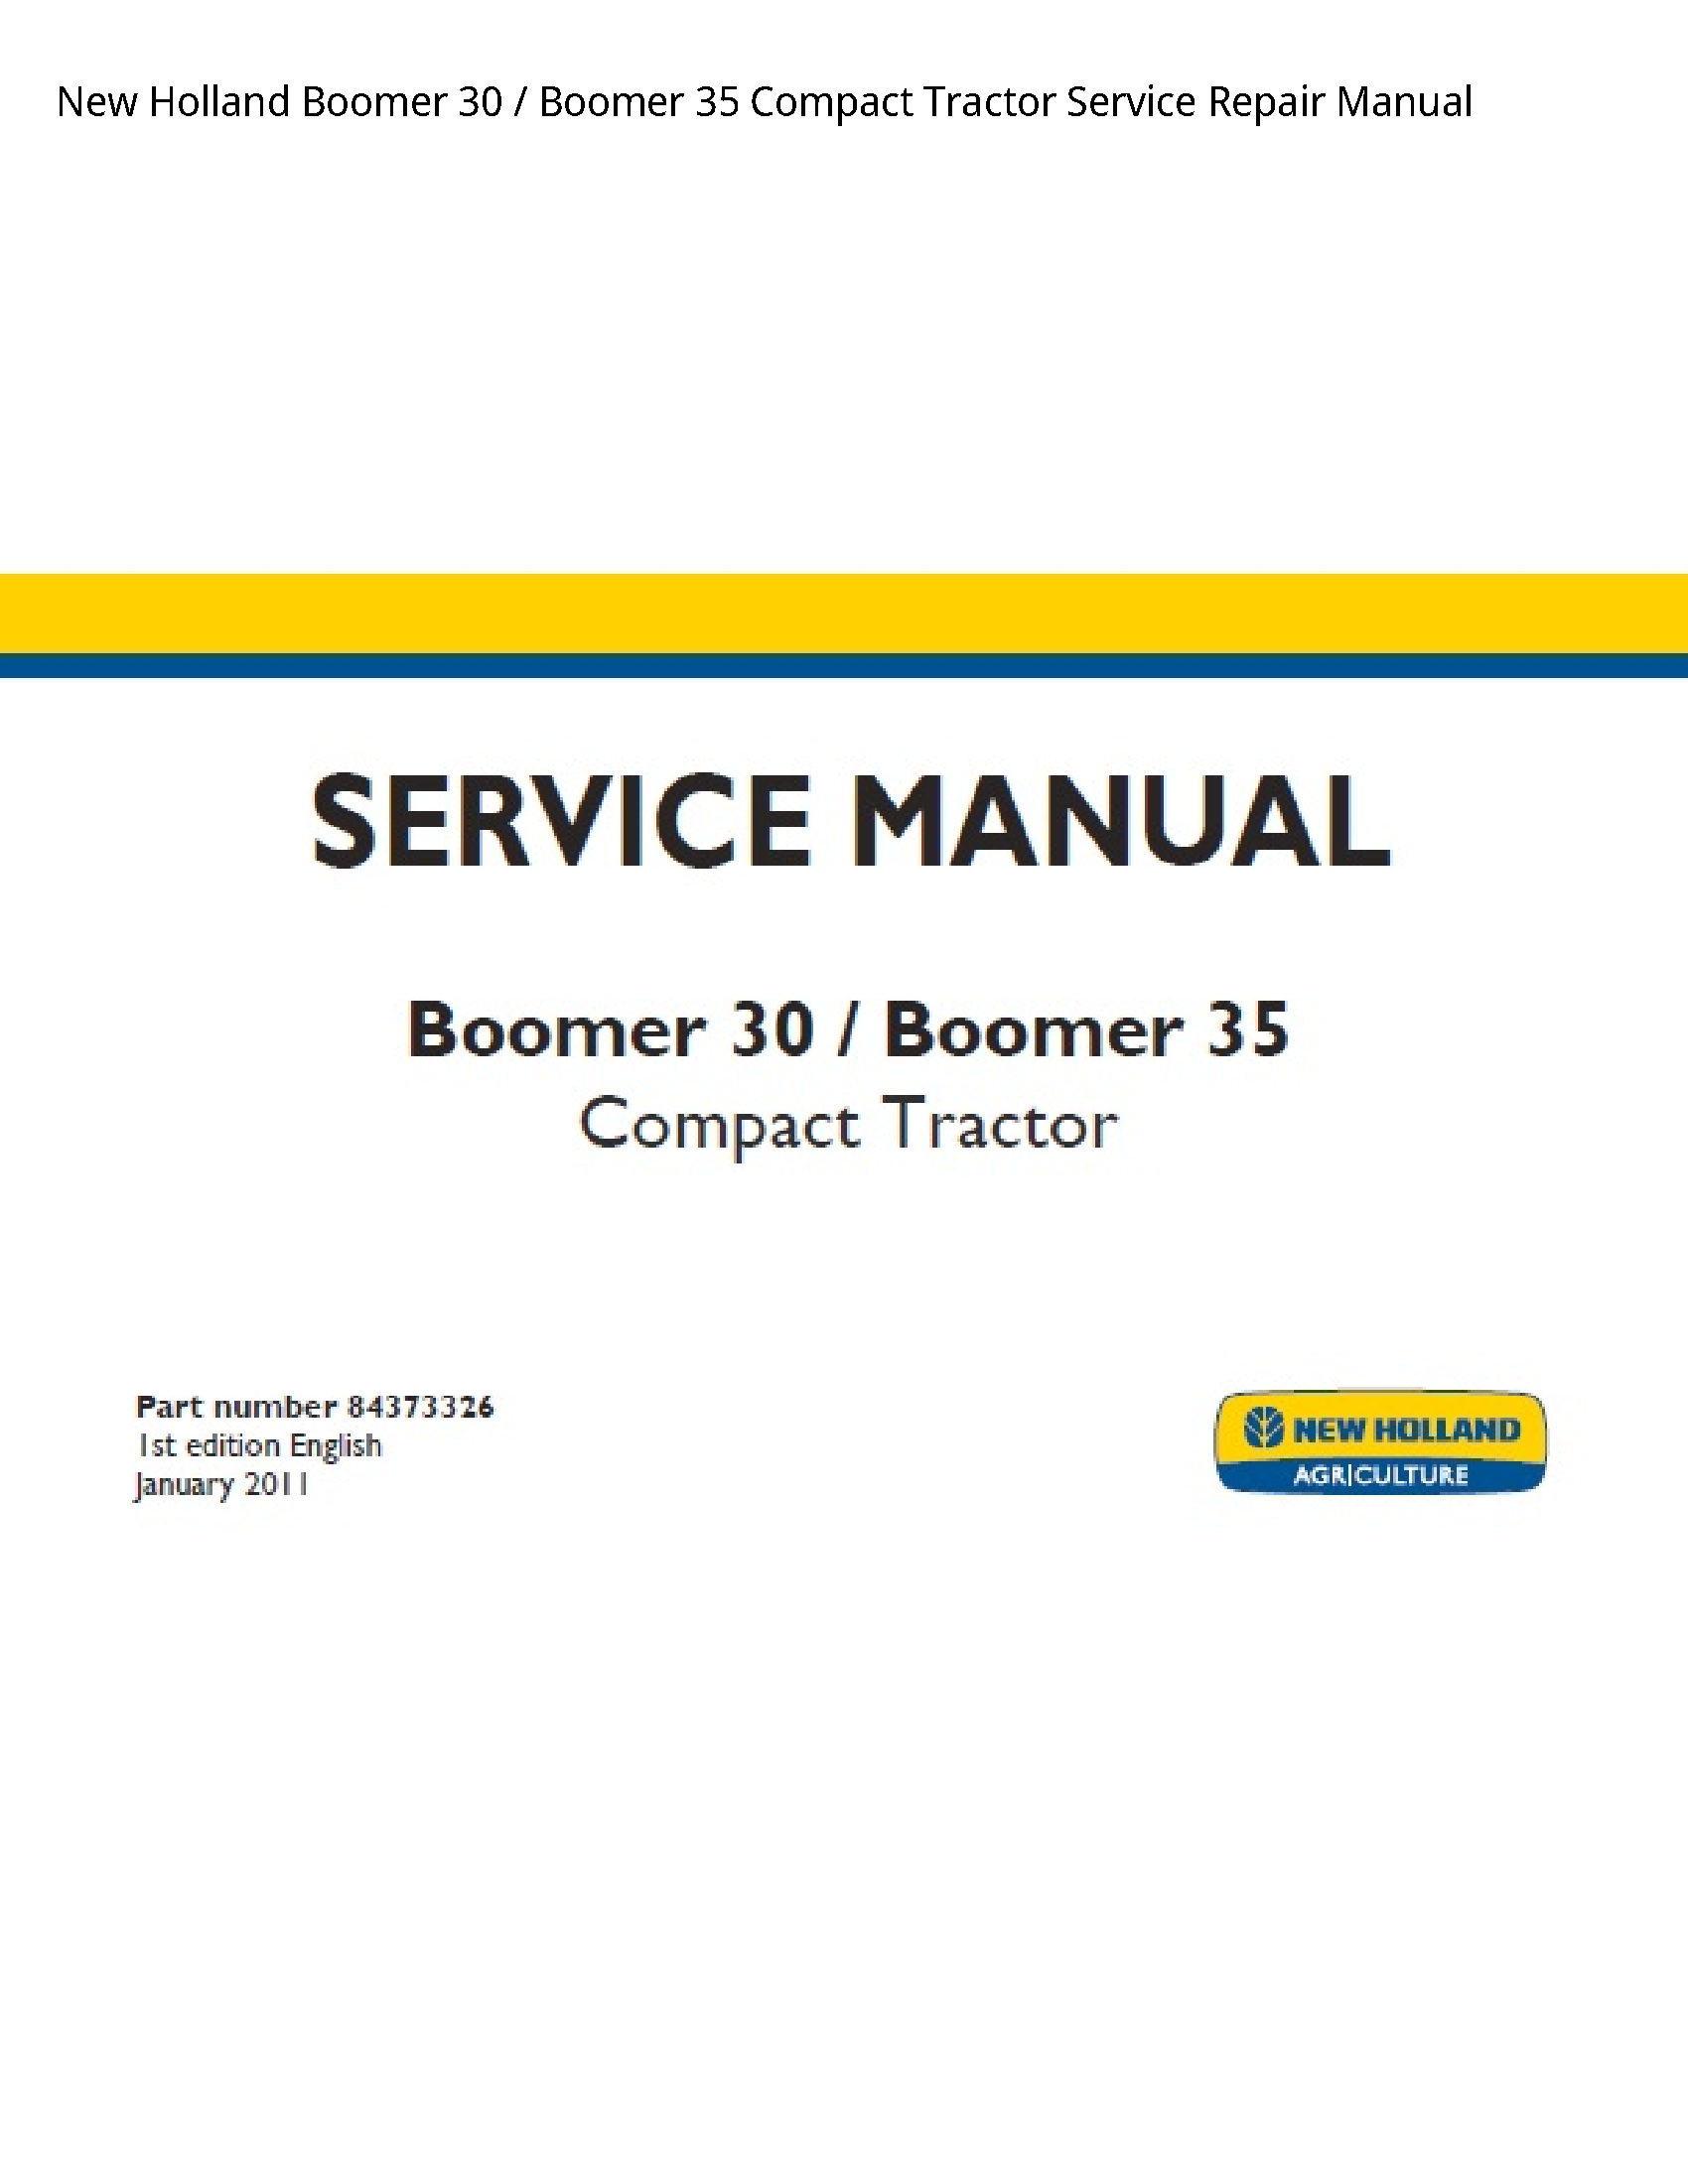 New Holland 30 Boomer Boomer Compact Tractor manual